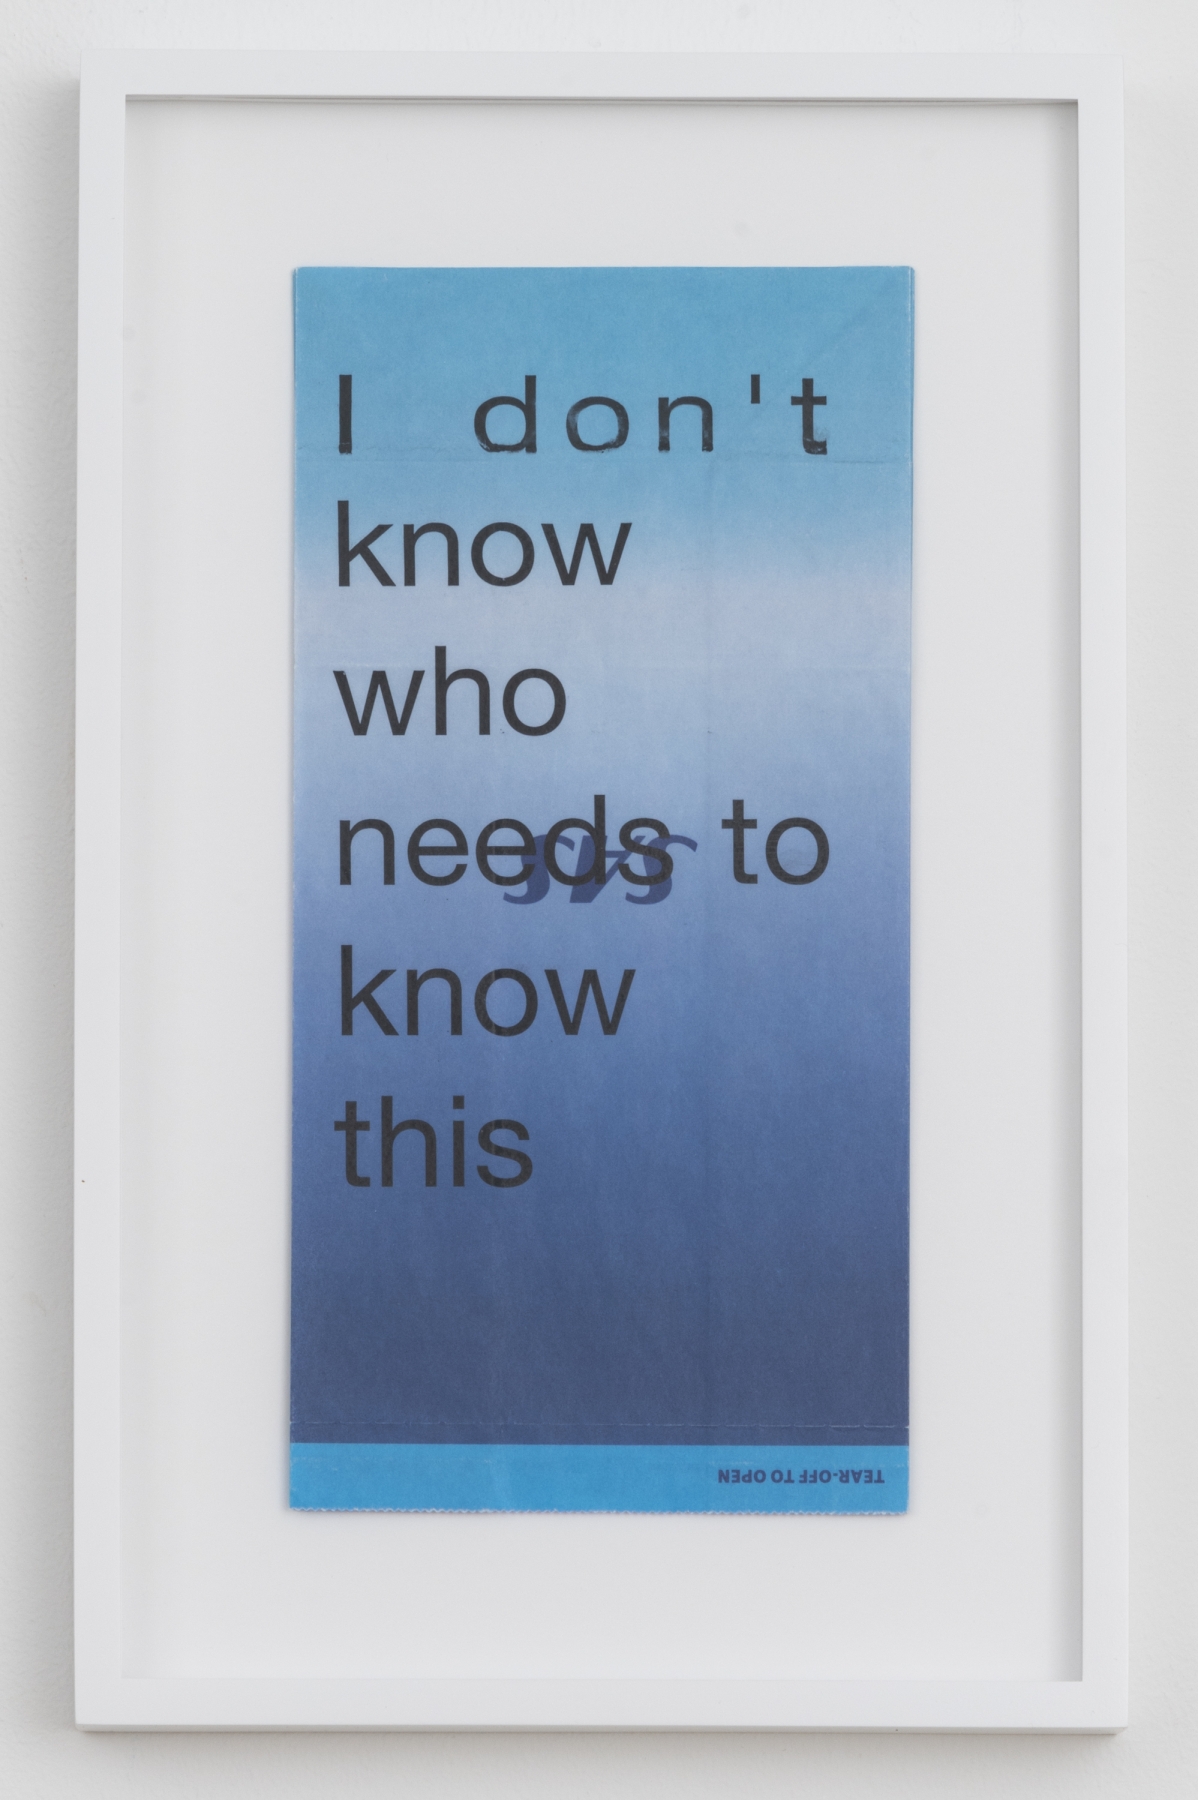 Cory Arcangel
I don&#39;t know who needs to know this, 2020
Hewlett Packard home office Laserjet on found Scandinavian Airlines vomit bag
Paper: 10 x 5 inches (25.4 x 12.7 cm)
Frame: 13 1/4 x 8 1/4 x 1 3/8 inches (33.7 x 21 x 3.5 cm)